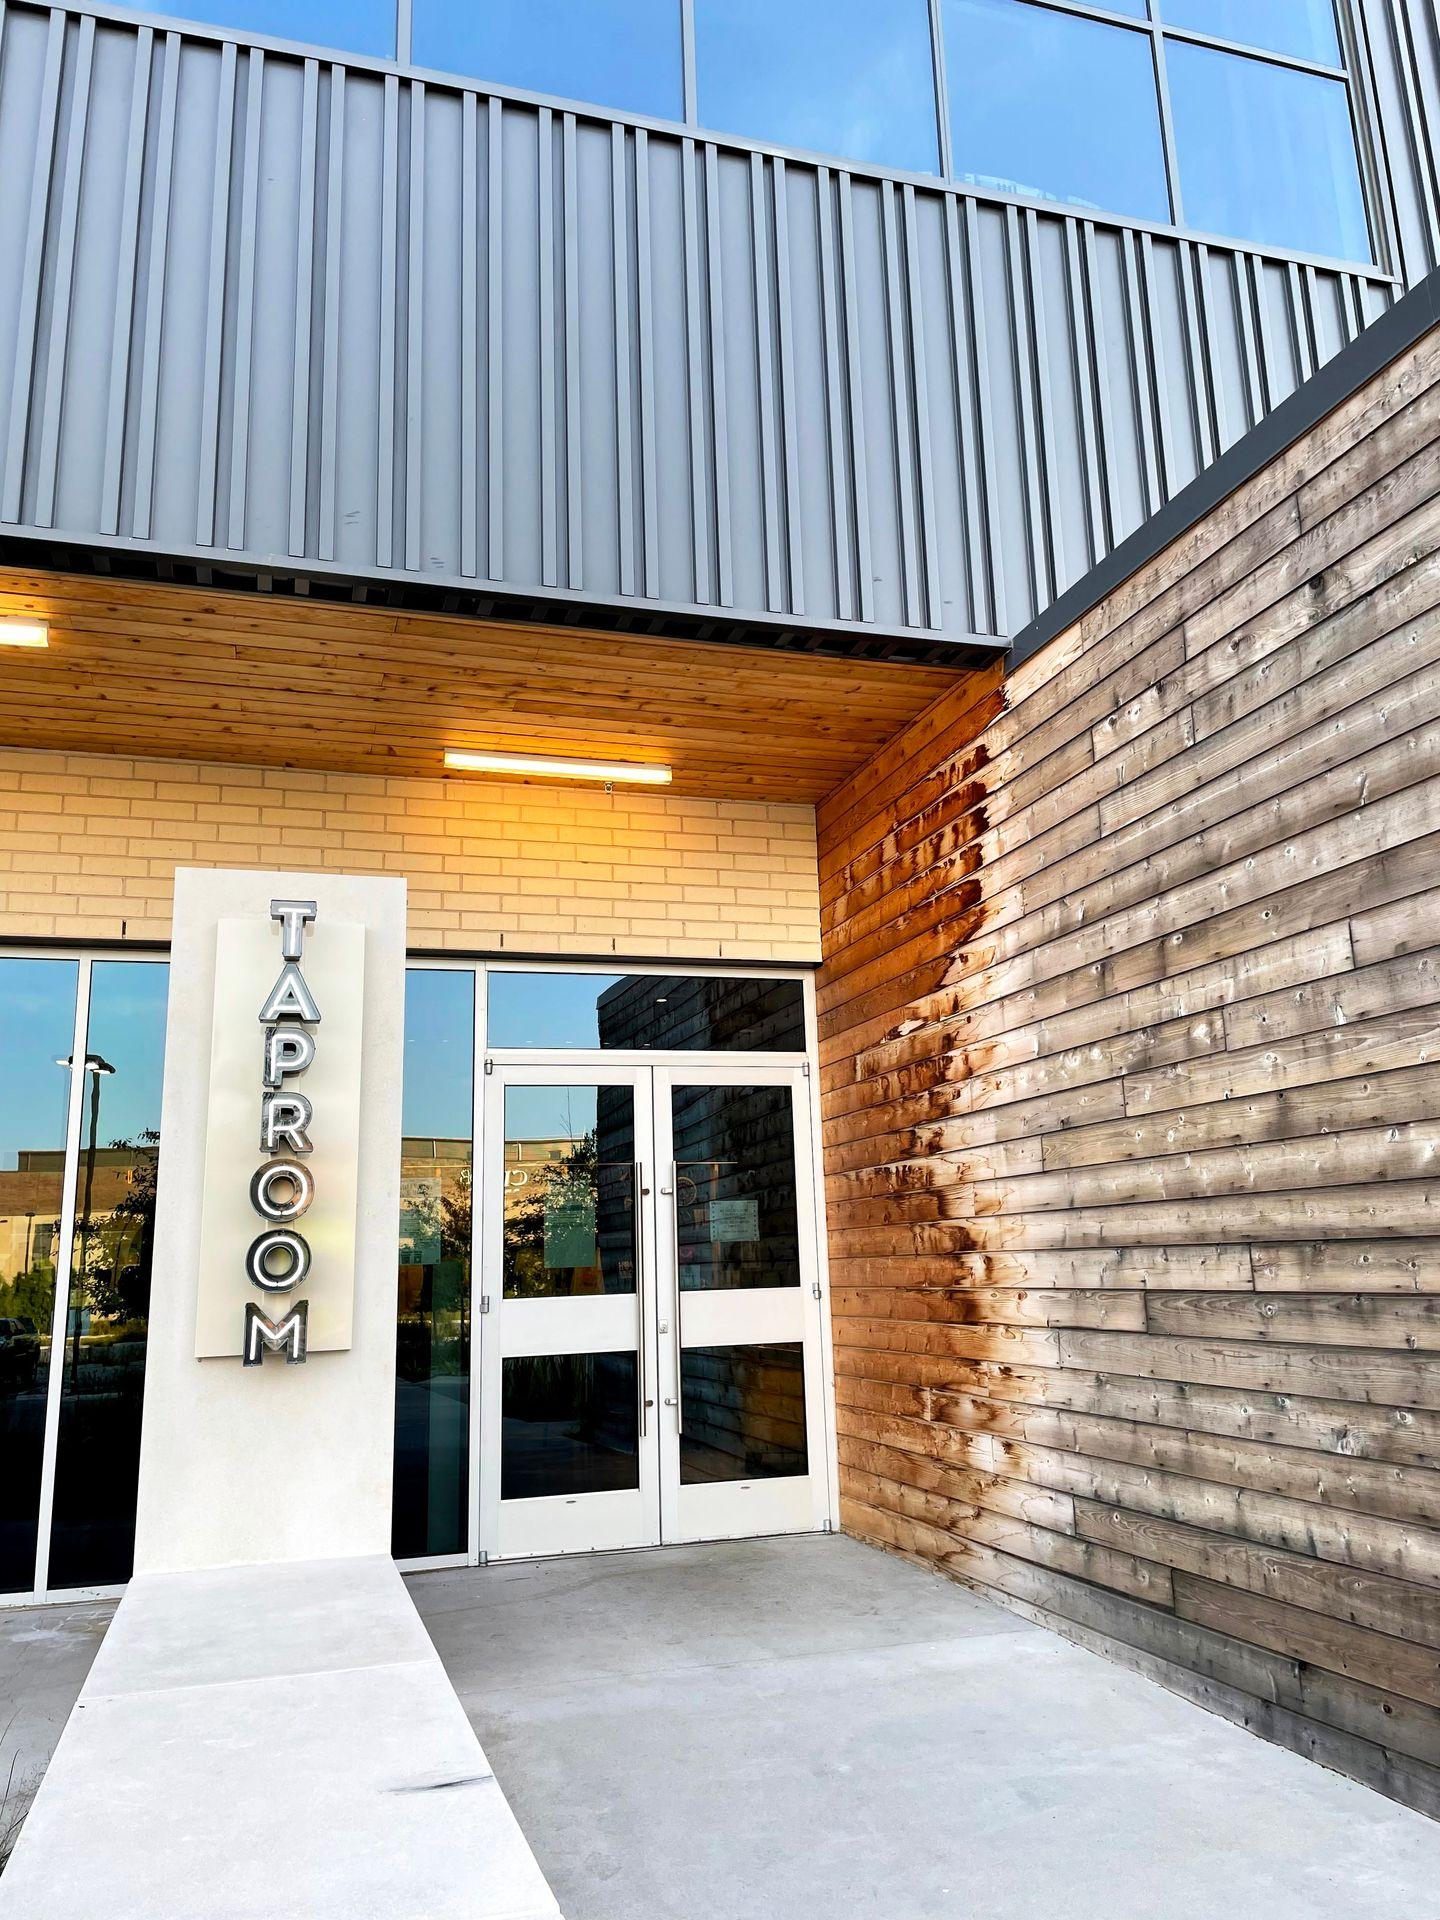 The entrance to the taproom of Bentonville Brewing Company.